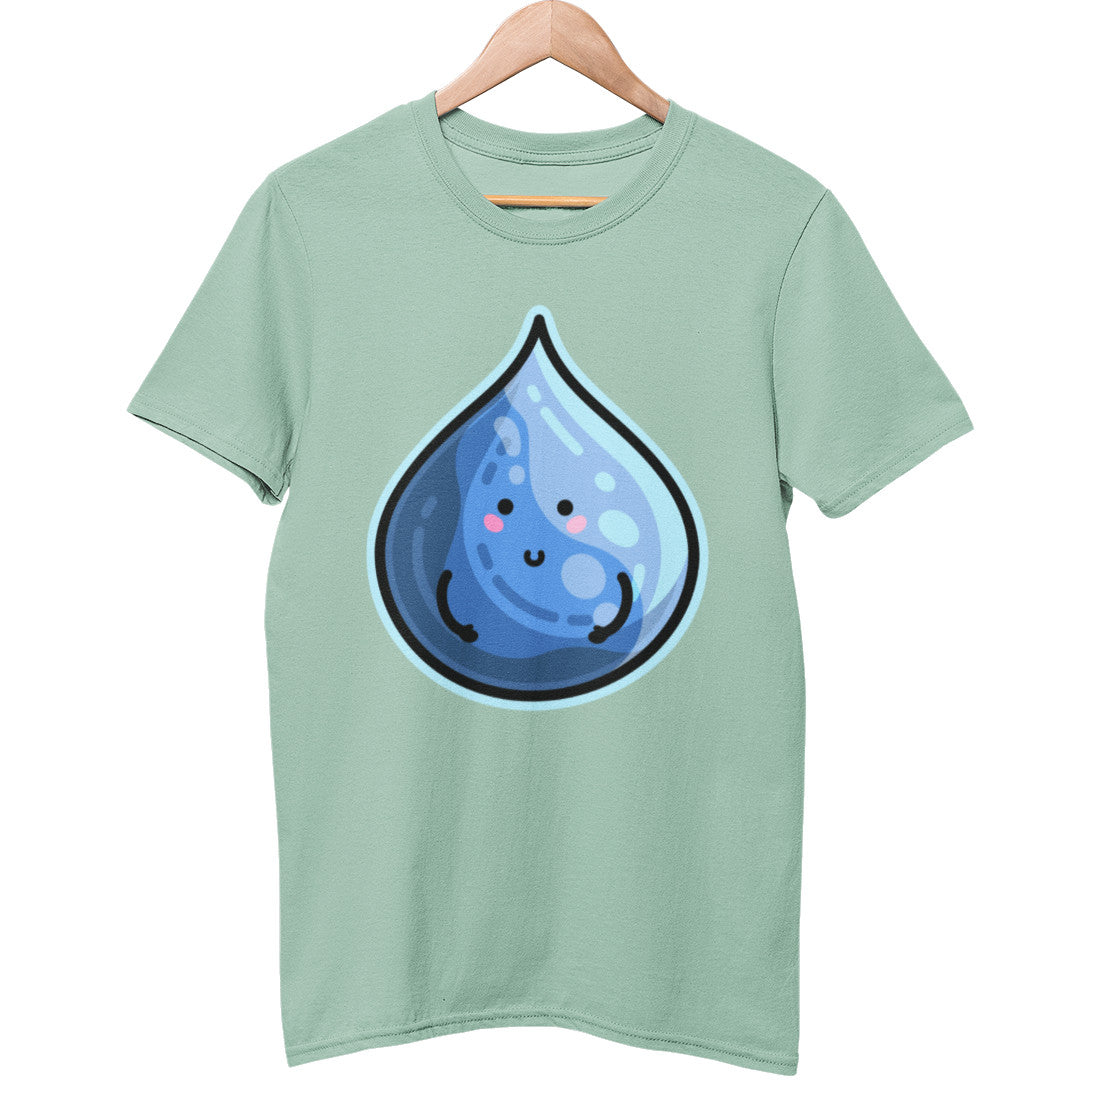 A green unisex crewneck t-shirt on a hanger with a design on its chest of a kawaii cute blue droplet of water